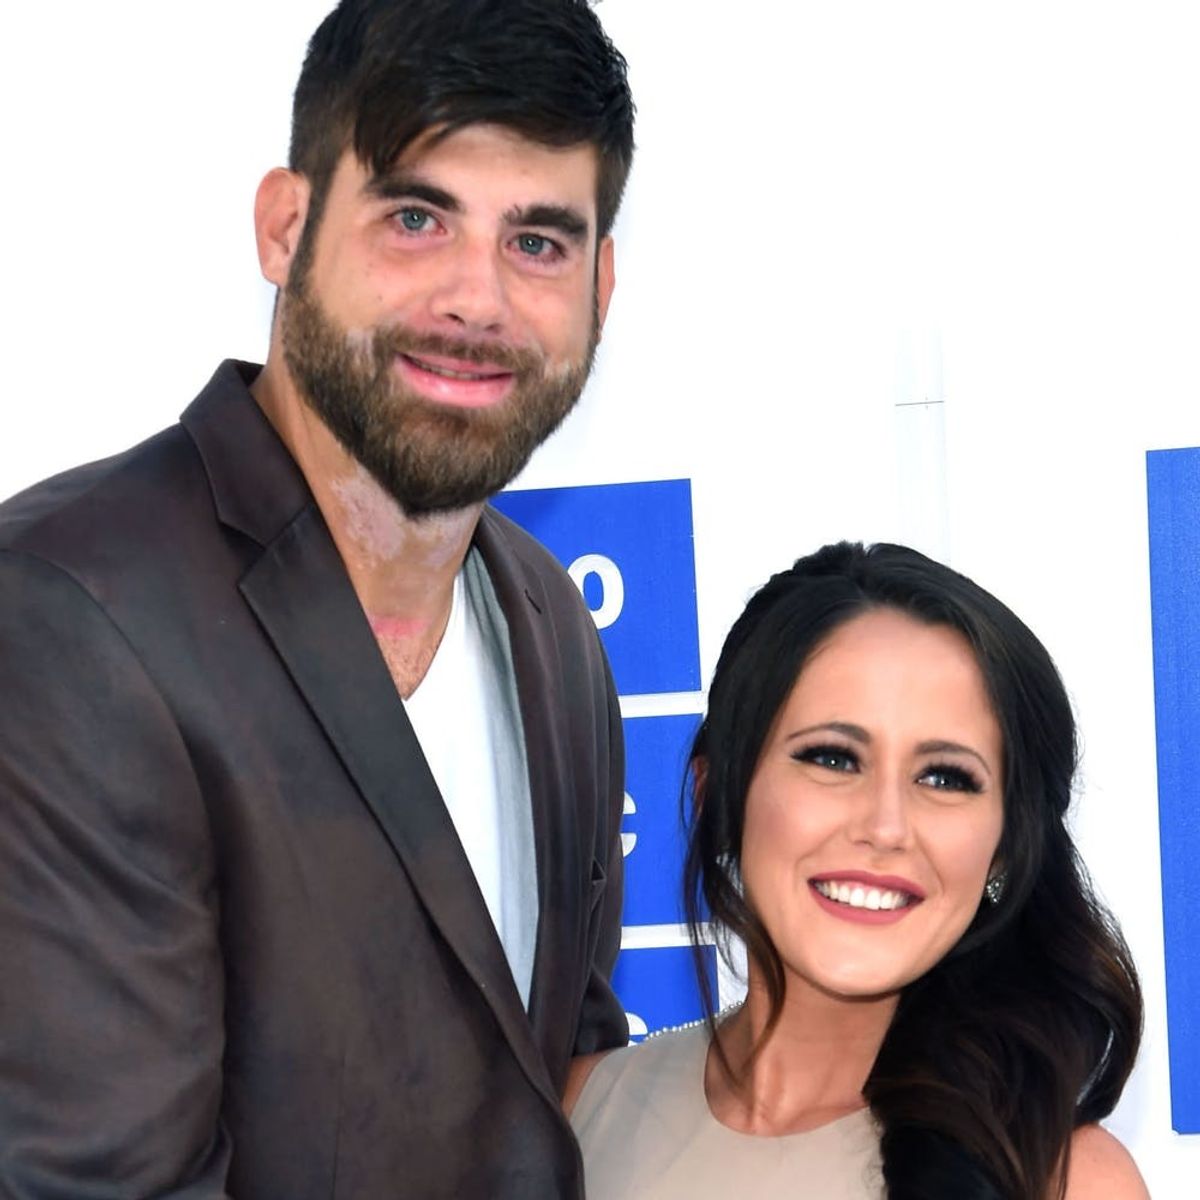 “Teen Mom 2” Star Jenelle Evans Just Tied the Knot in an Adorably Rustic Backyard Ceremony